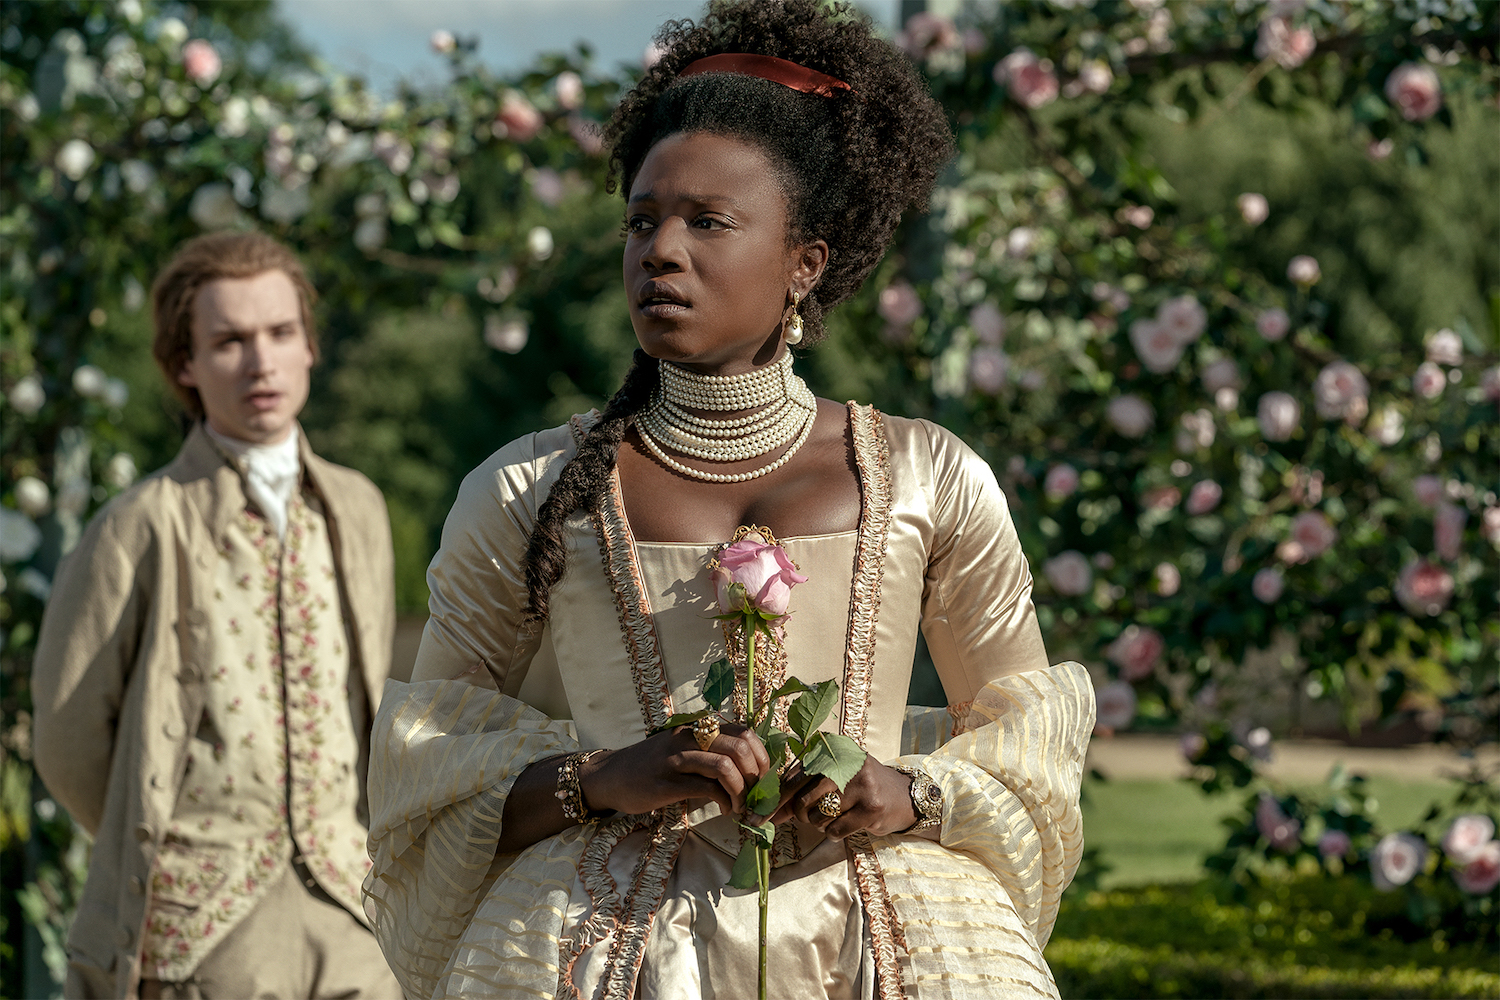 Picture shows: In a beautiful rose garden Pascal (Nicholas Denton) asks his stepmother Ondine de Valmont (Colette Dala Tchantcho) for a share of the estate.